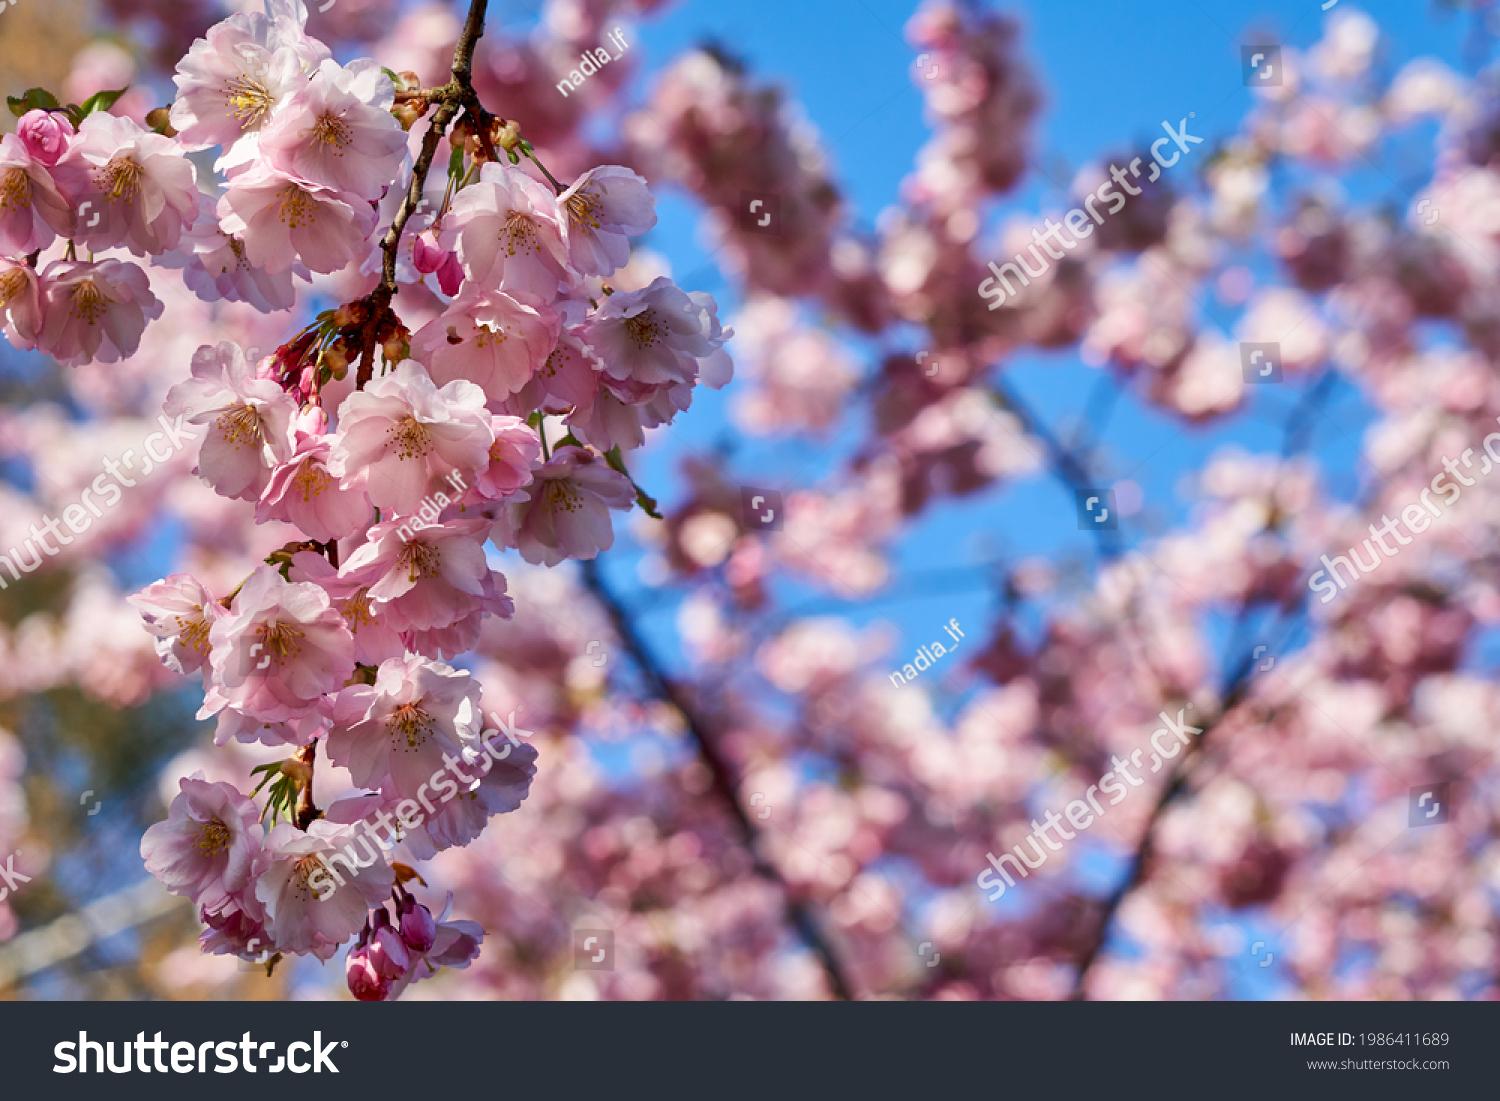 Selective focus of beautiful branches of pink Cherry blossoms on the tree under blue sky, Beautiful Sakura flowers during spring season in the park, Flora pattern texture, Nature floral background. #1986411689